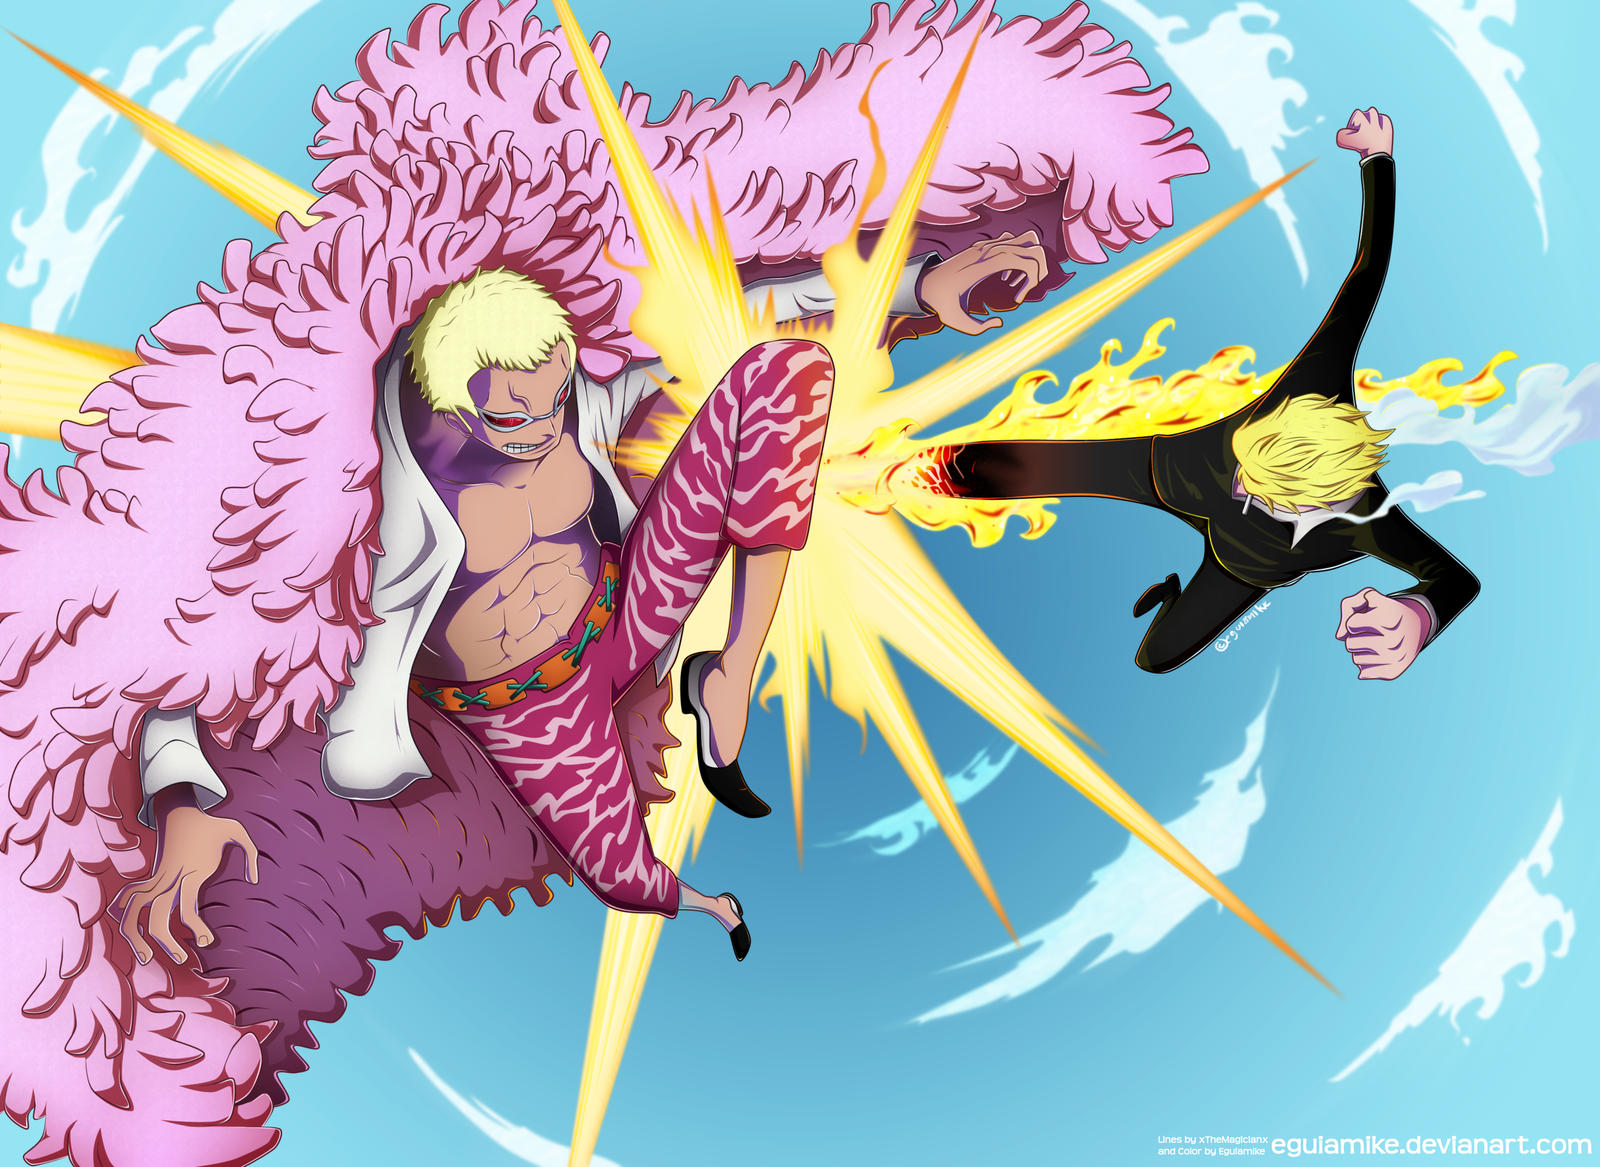 One Piece 723 Sanji Vs Doflamingo Request By By Eguiamike On Deviantart